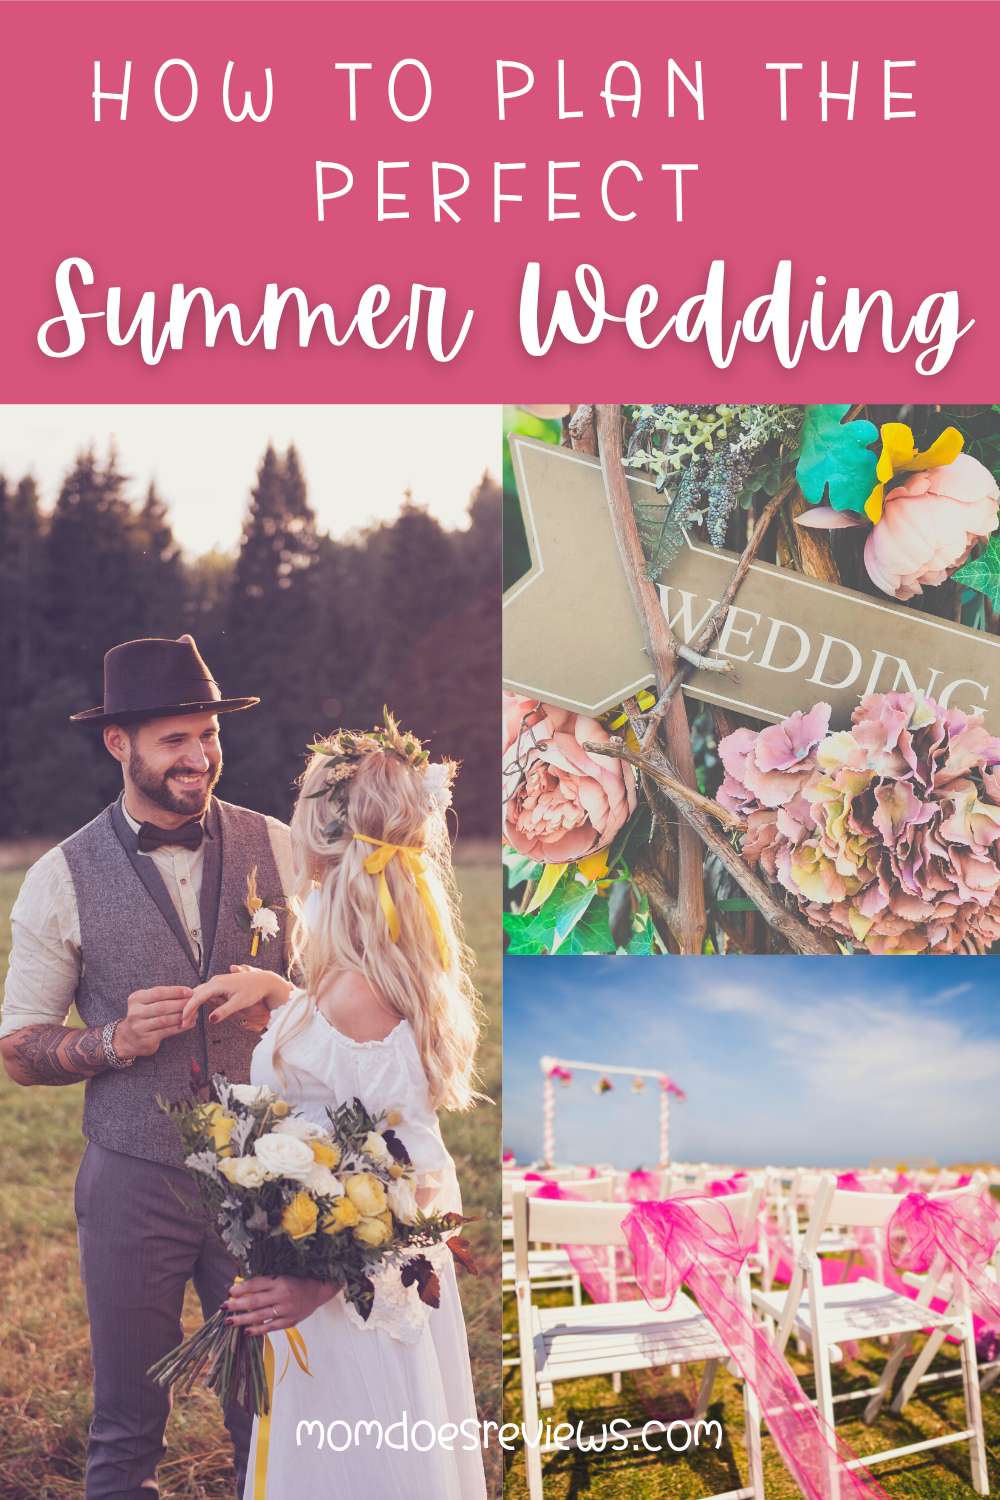 How to Plan the Perfect Summer Wedding